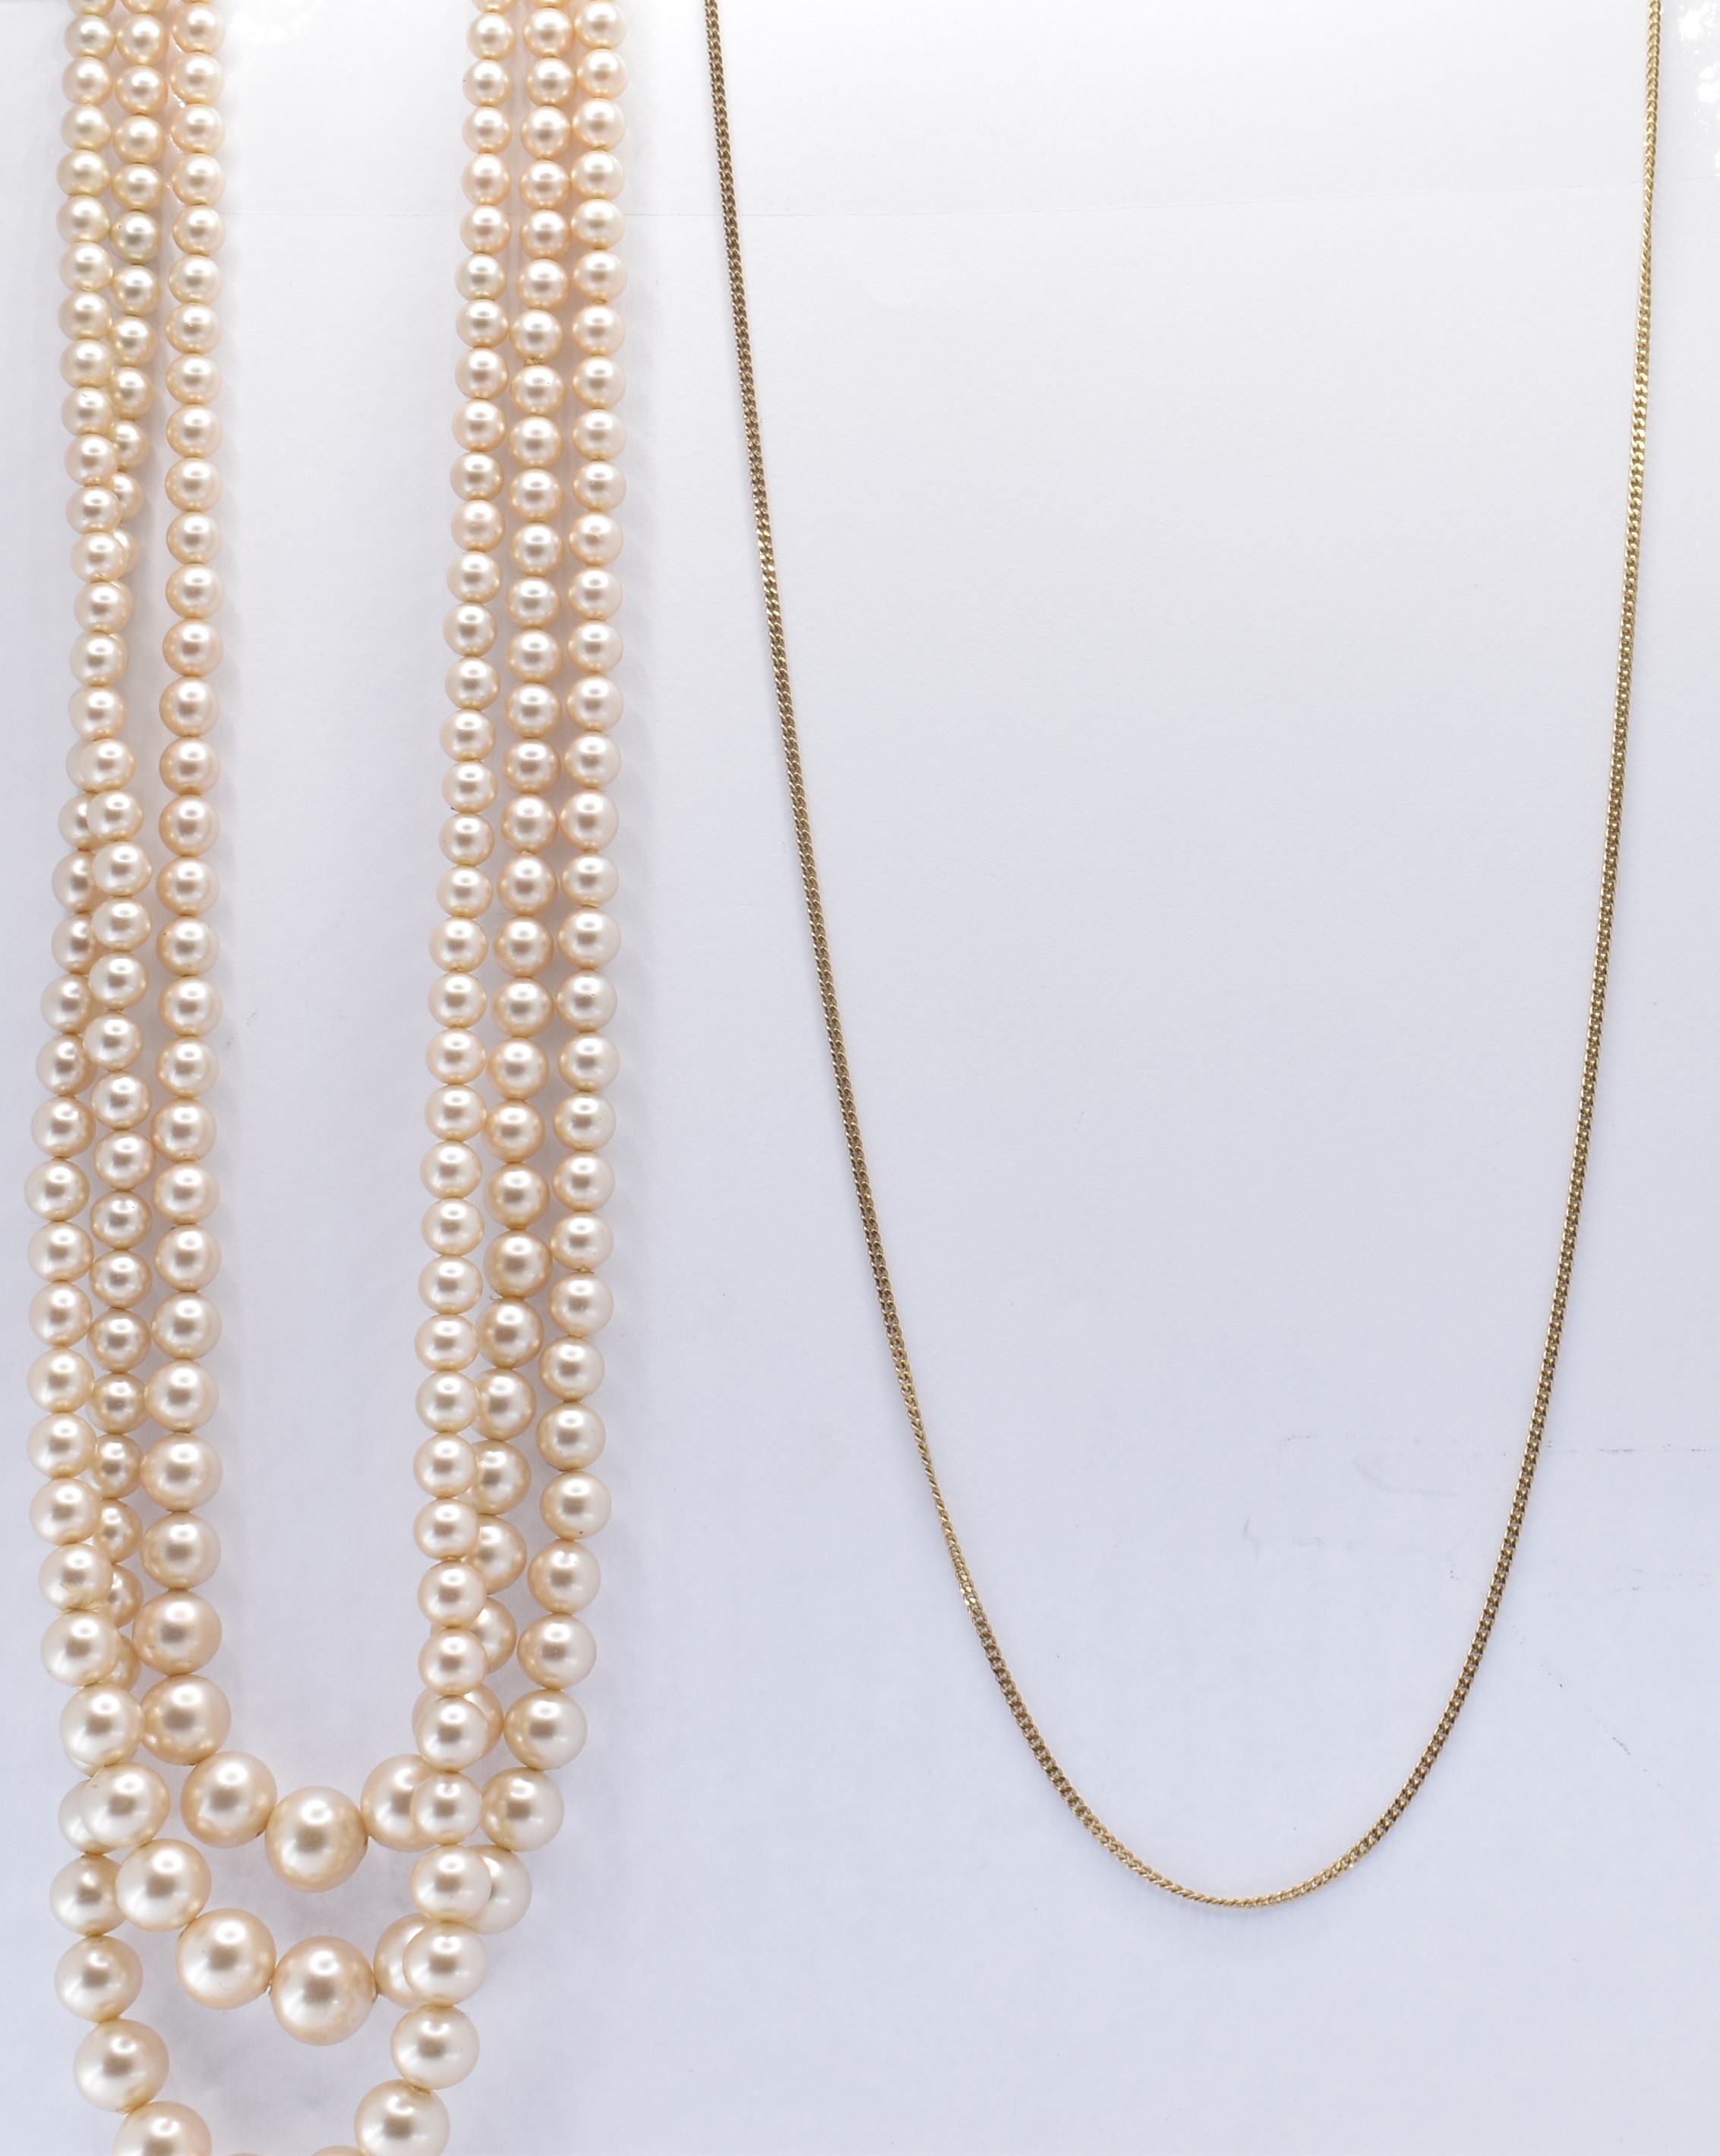 14CT GOLD NECKLACE CHAIN & CIRO PEARL NECKLACE - Image 3 of 8